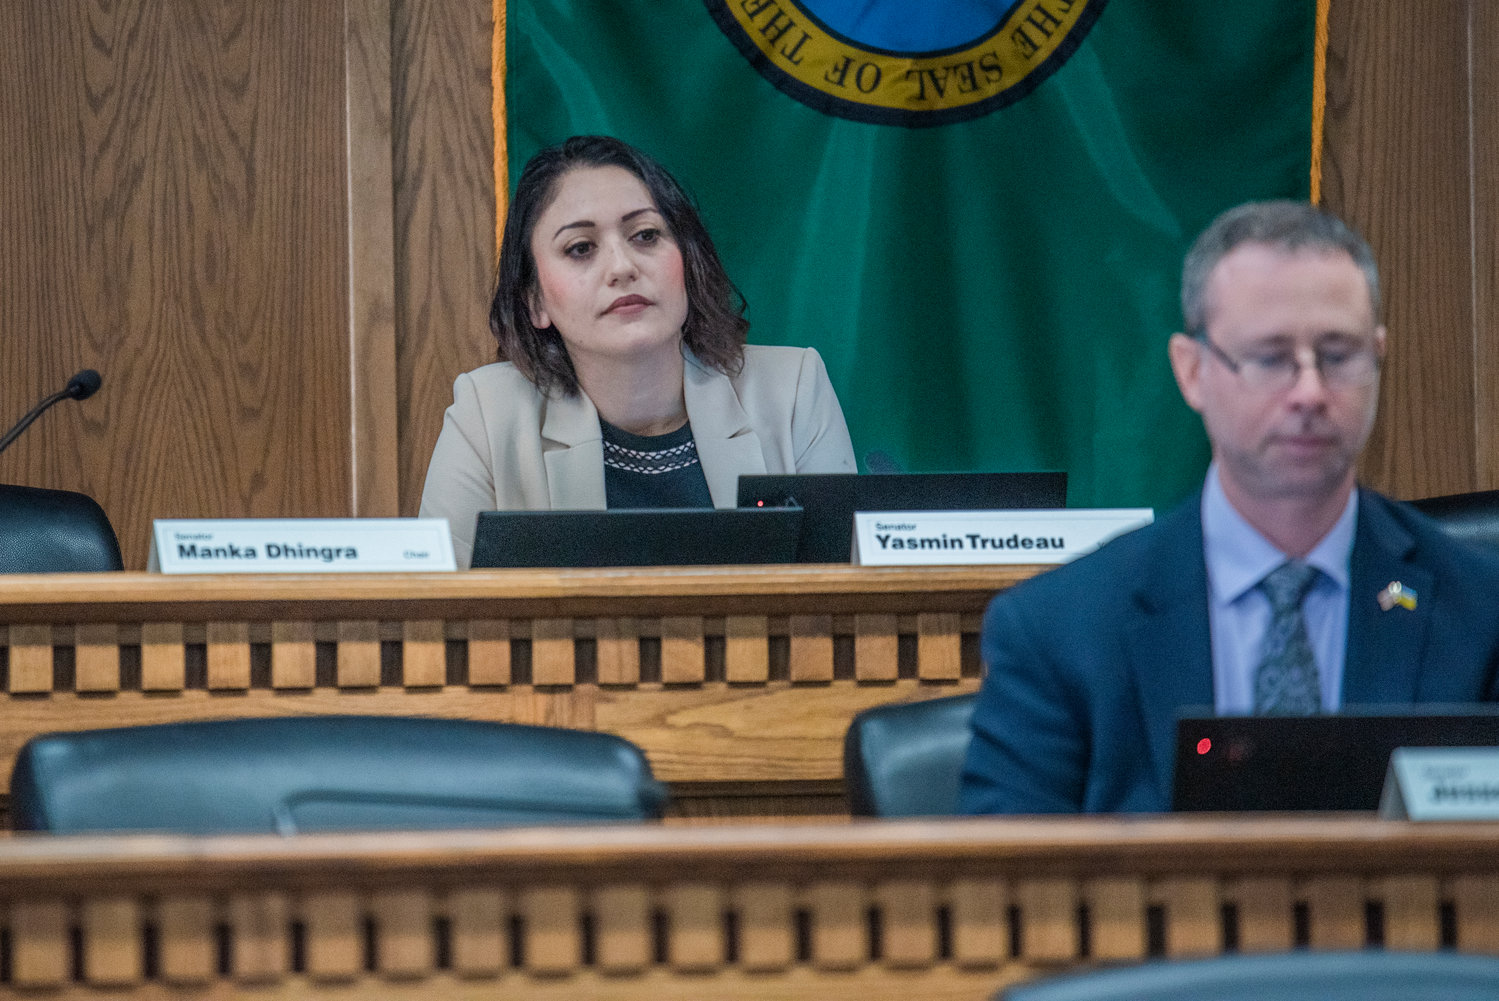 State Sen. Yasmin Trudeau presides over the Senate Law and Justice Committee during a hearing on a catalytic converter bill sponsored by Sen. Jeff Wilson.